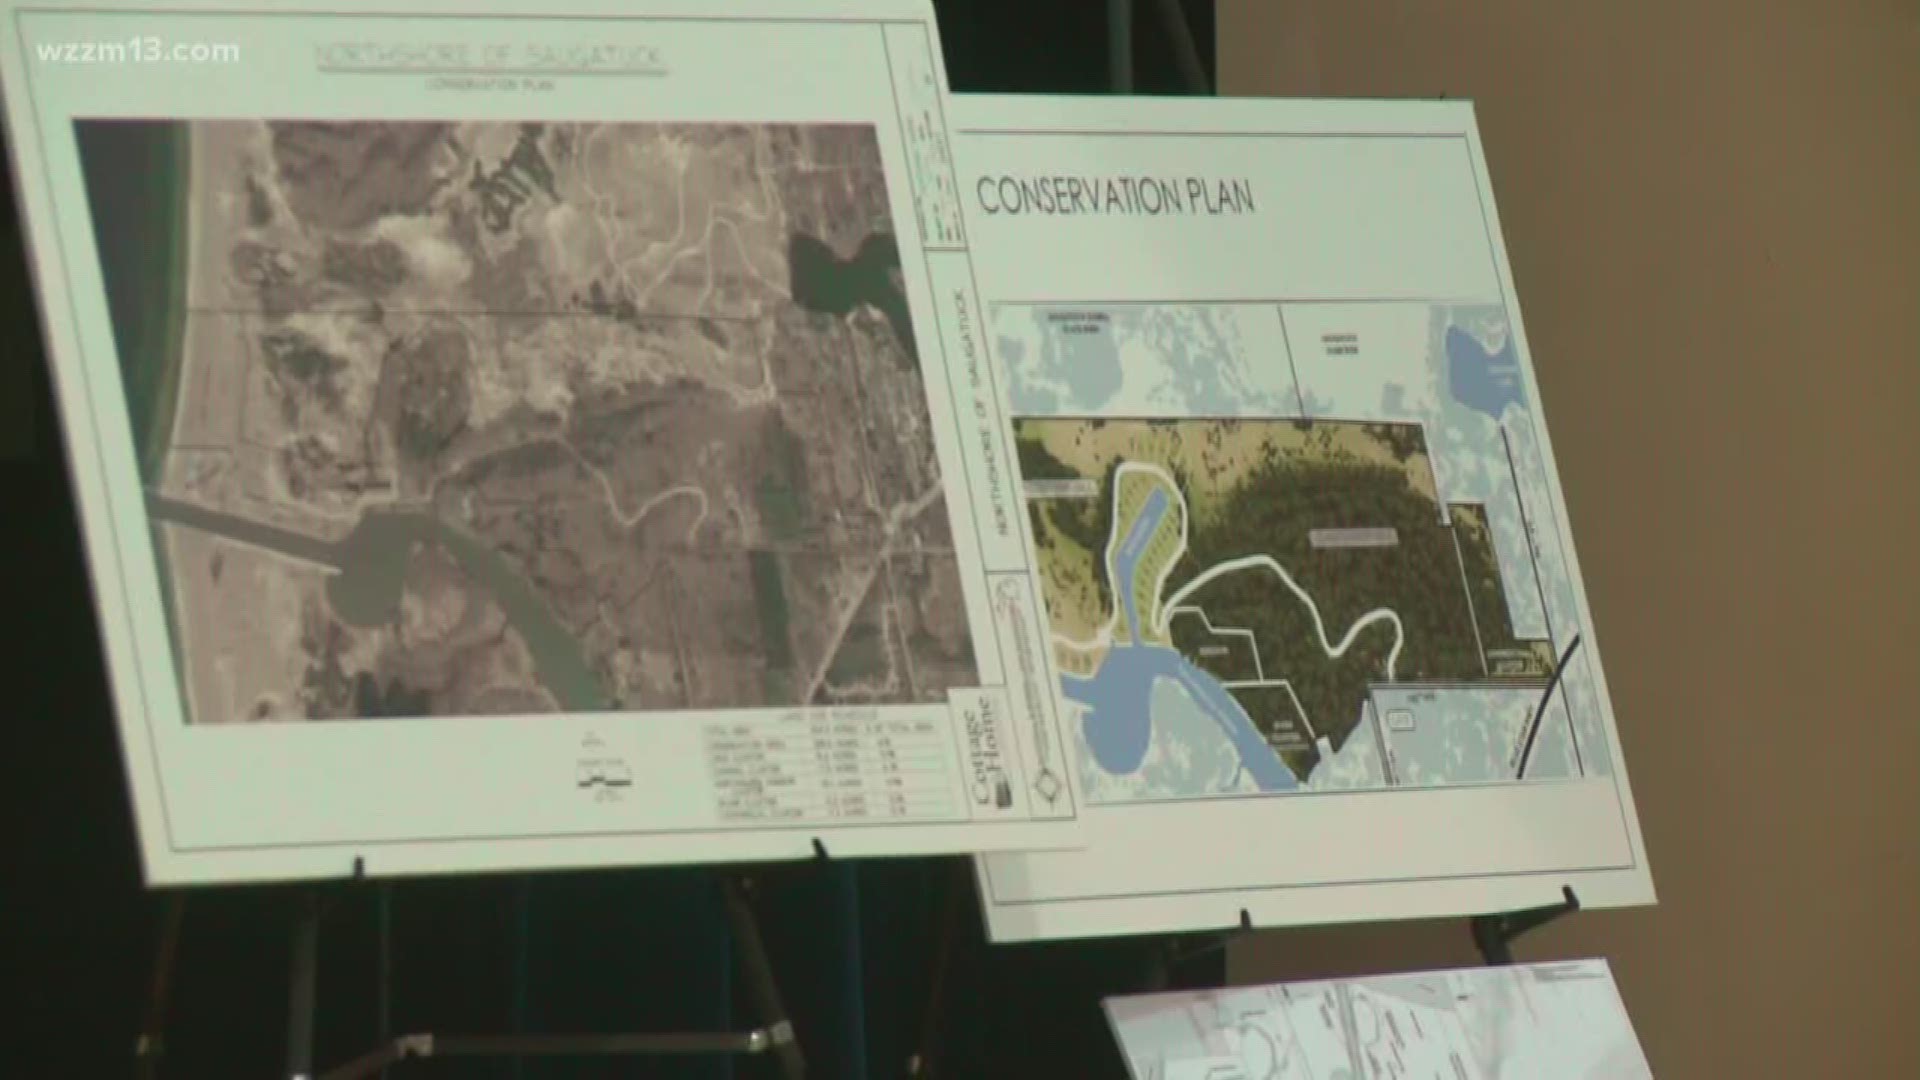 A public hearing was held in Saugatuck to discuss a proposal to dig a marina on the mouth of the Kalamazoo River.